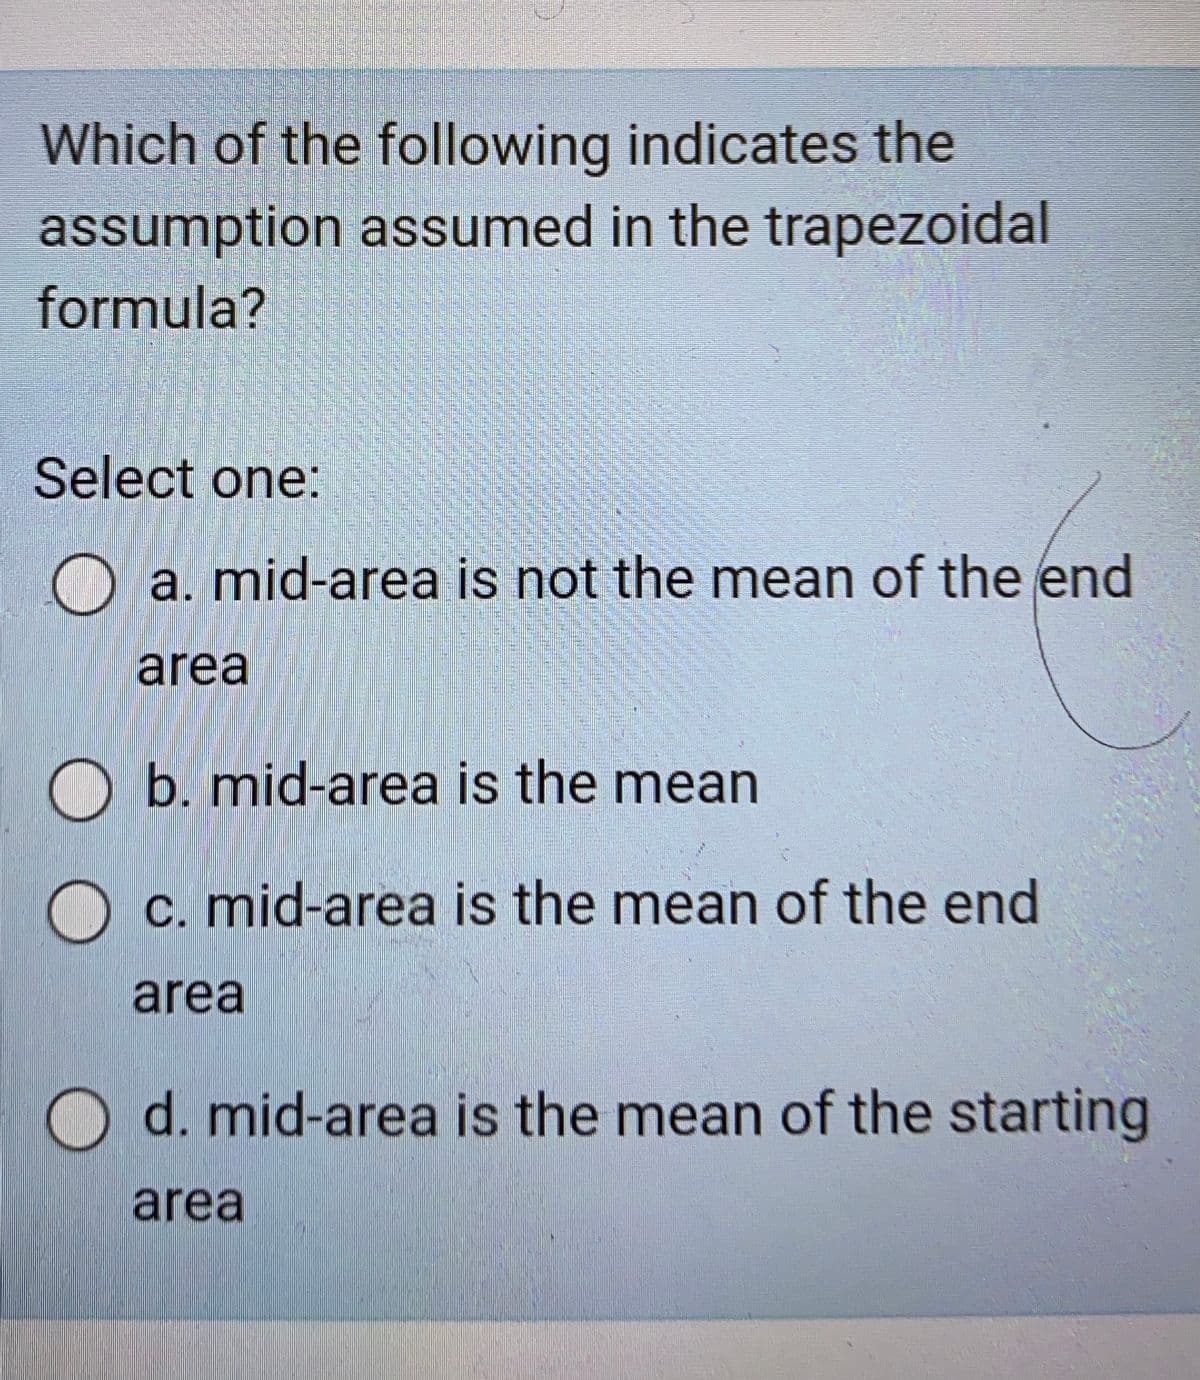 Which of the following indicates the
assumption assumed in the trapezoidal
formula?
Select one:
O a. mid-area is not the mean of the end
area
O b. mid-area is the mean
O C. mid-area is the mean of the end
area
d. mid-area is the mean of the starting
area
